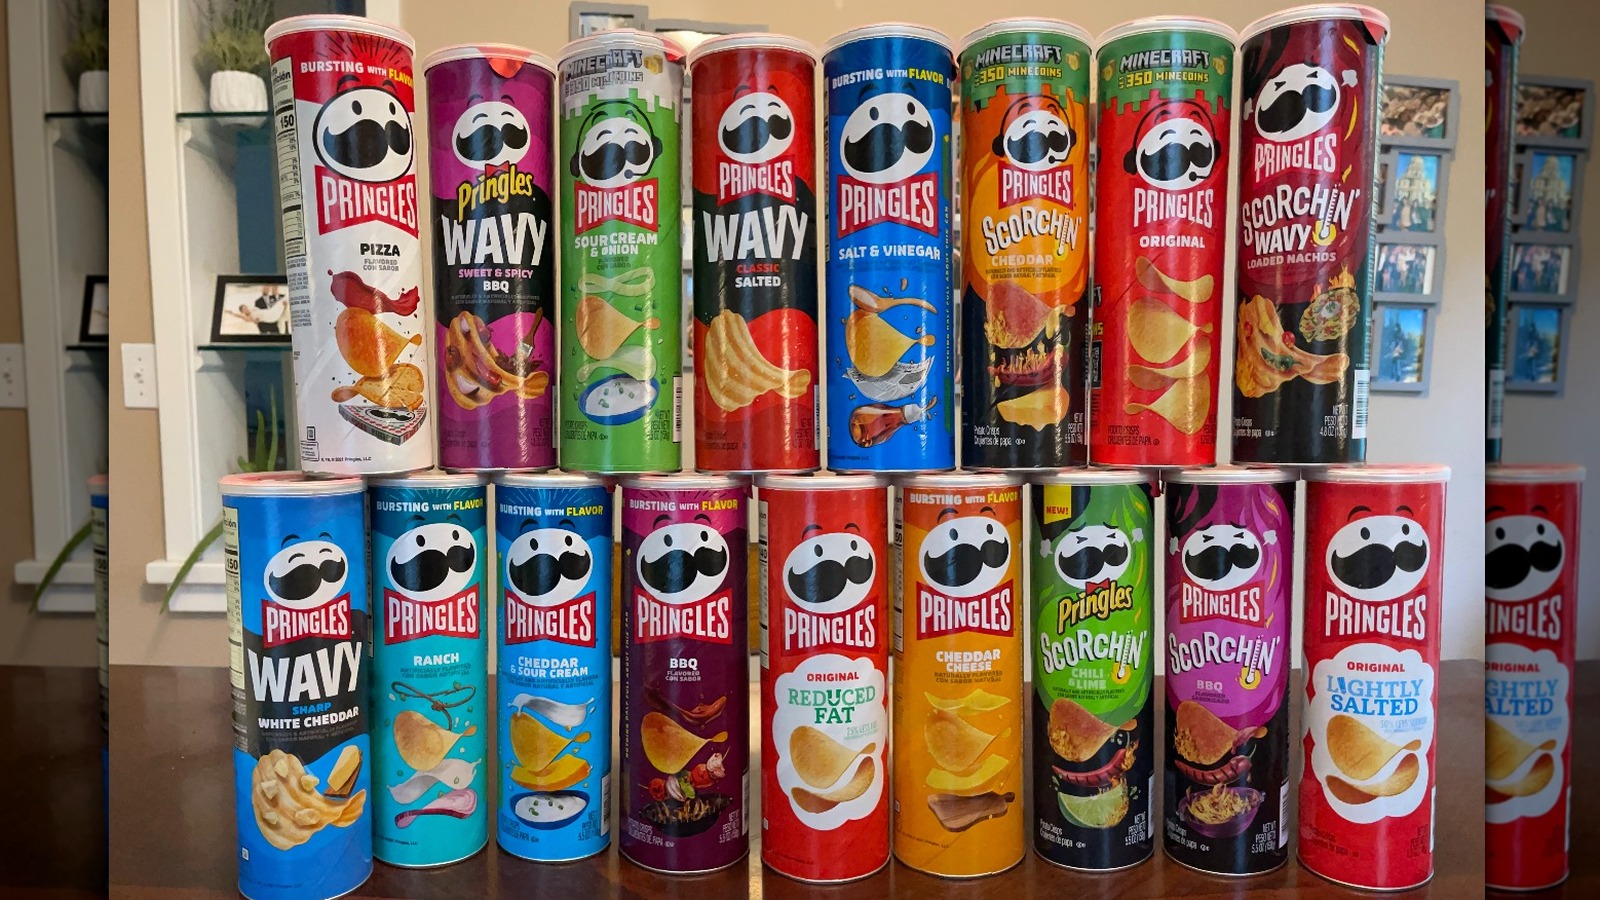 Ranking Pringles Flavors From Worst To Best, pringles - okgo.net